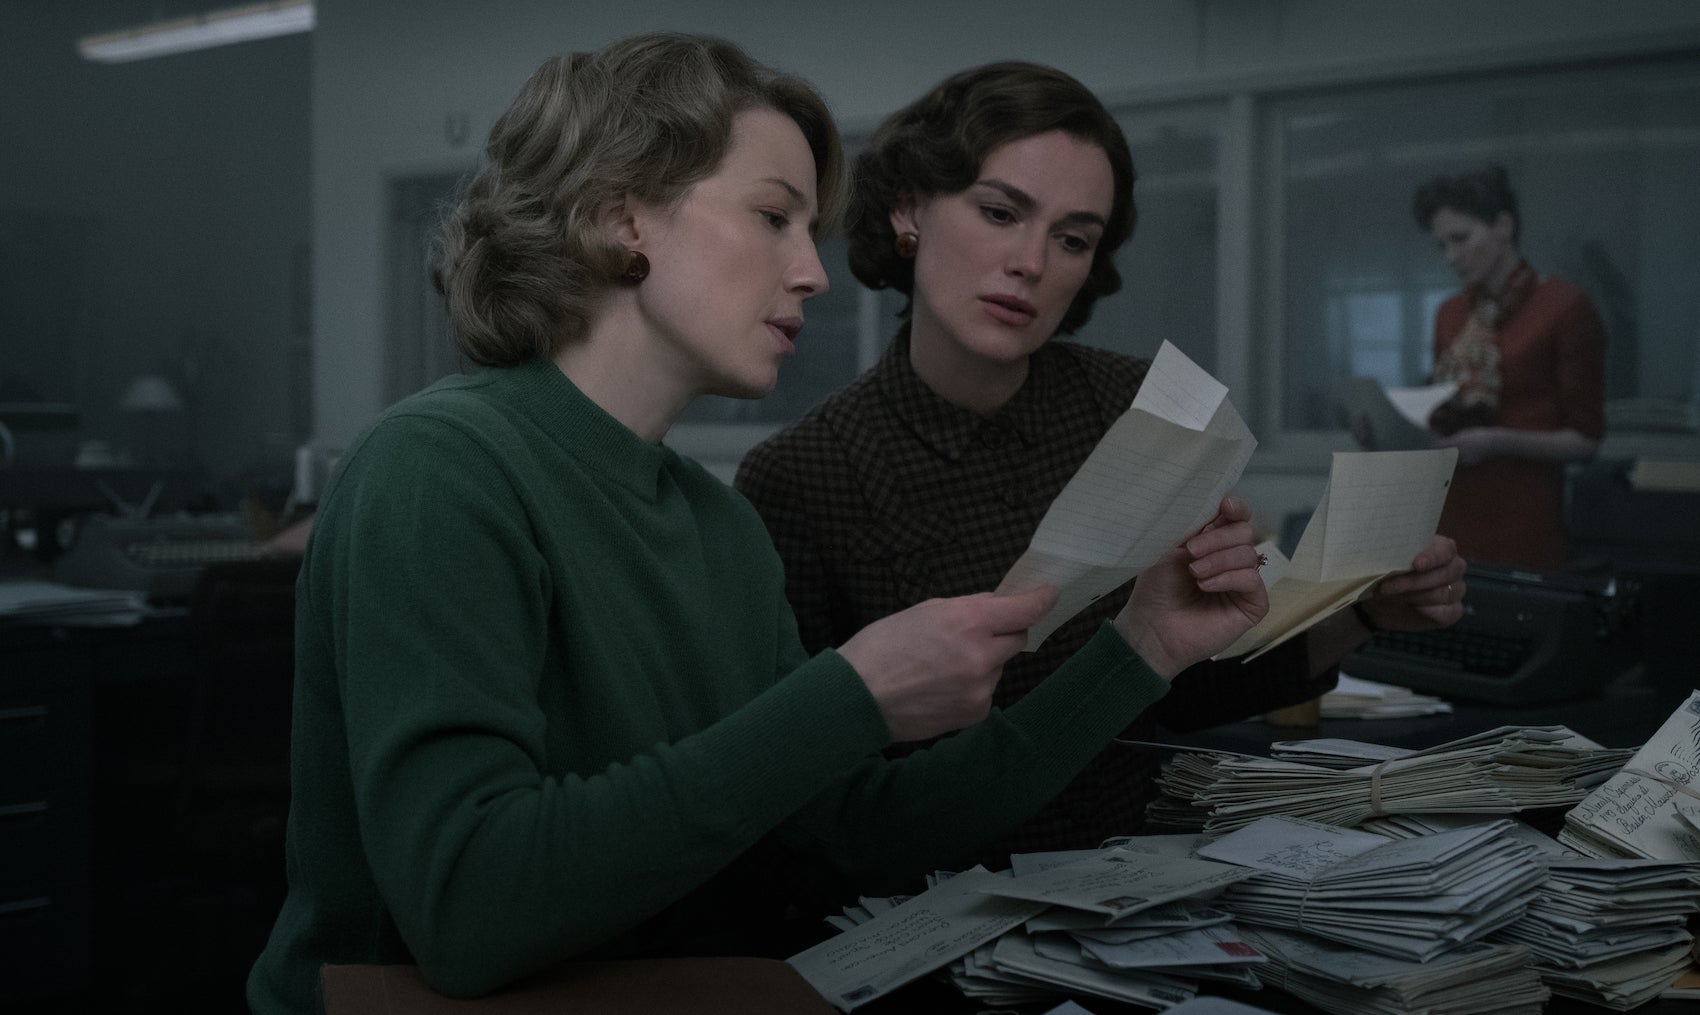 Carrie Coon as Jean Cole and Keira Knightley as Loretta McLaughlin in "Boston Strangler."